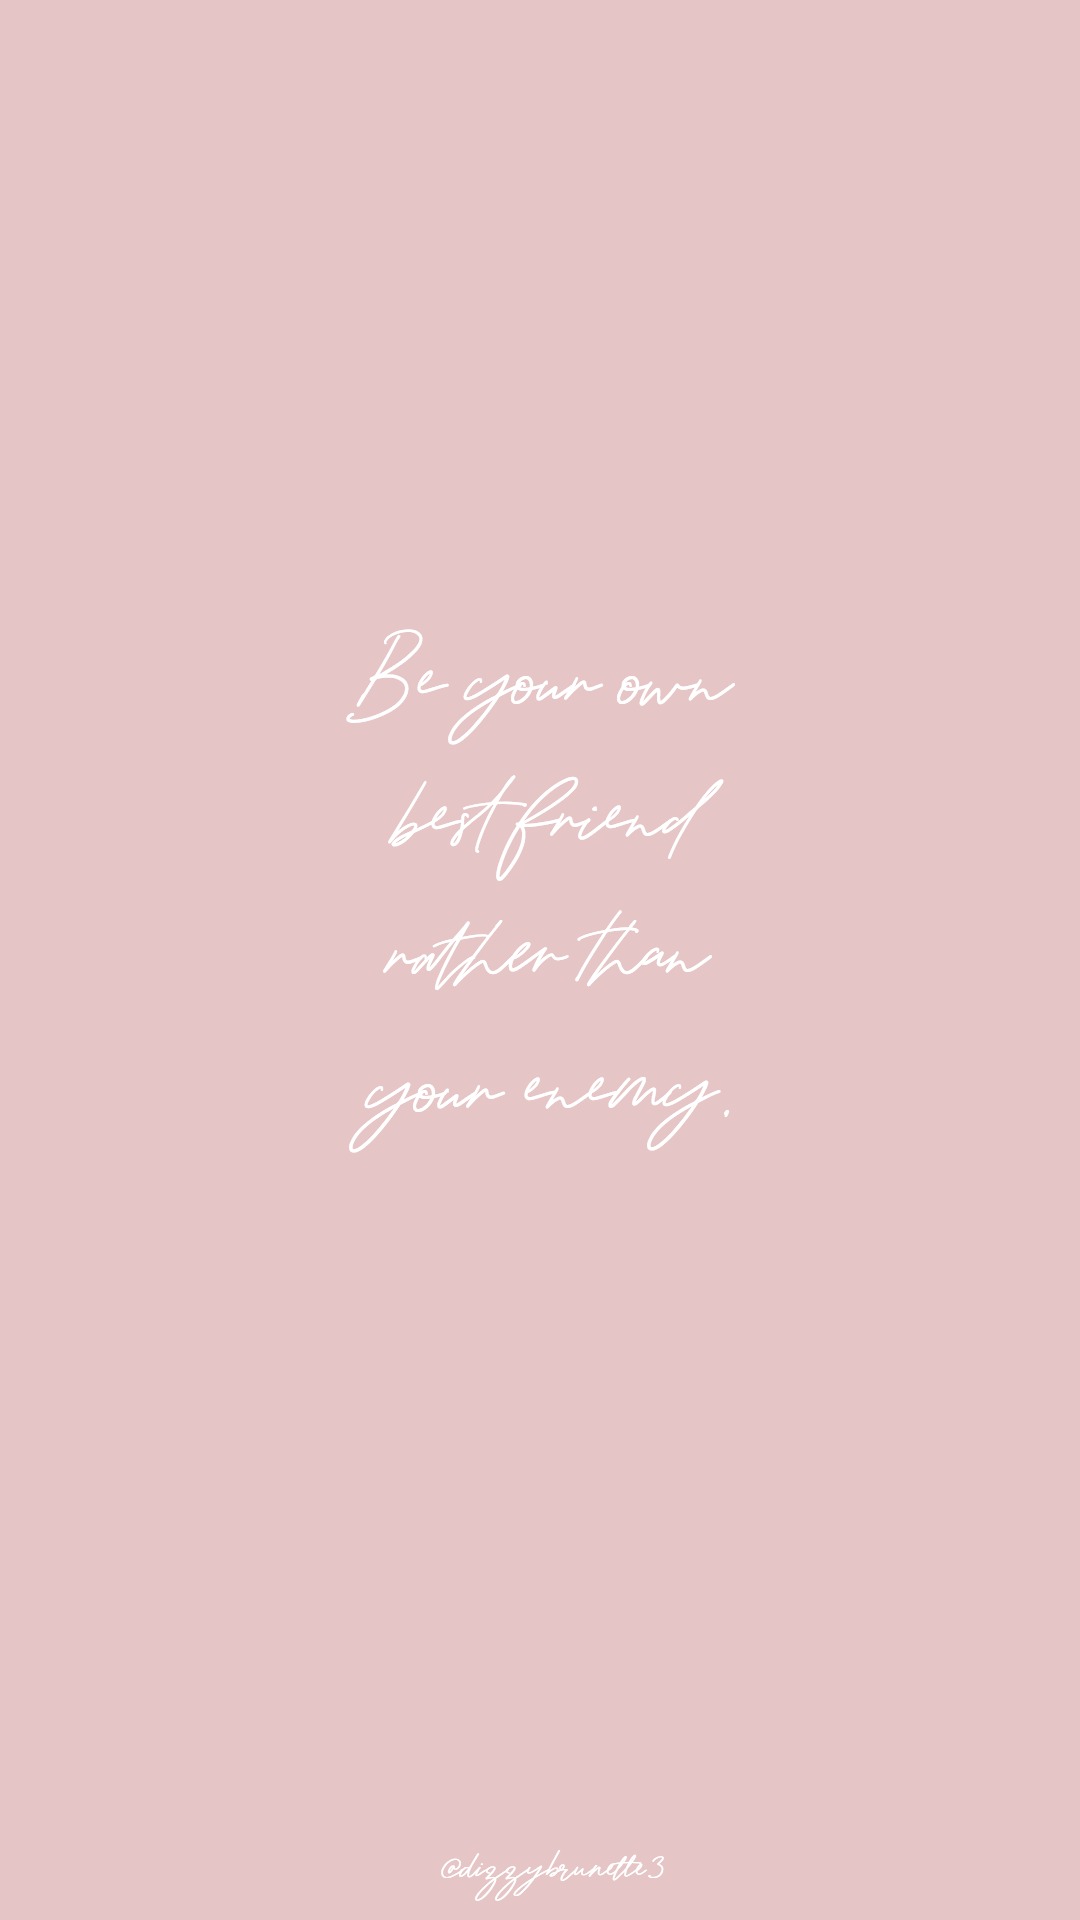 free iphone wallpapers, free phone wallpapers, free phone backgrounds, iphone wallpapers, pretty iphone wallpapers, pink phone wallpapers, phone backgrounds, dizzybrunette3 wallpapers, motivational quotes, inspirational quotes, gilmore girls quotes 